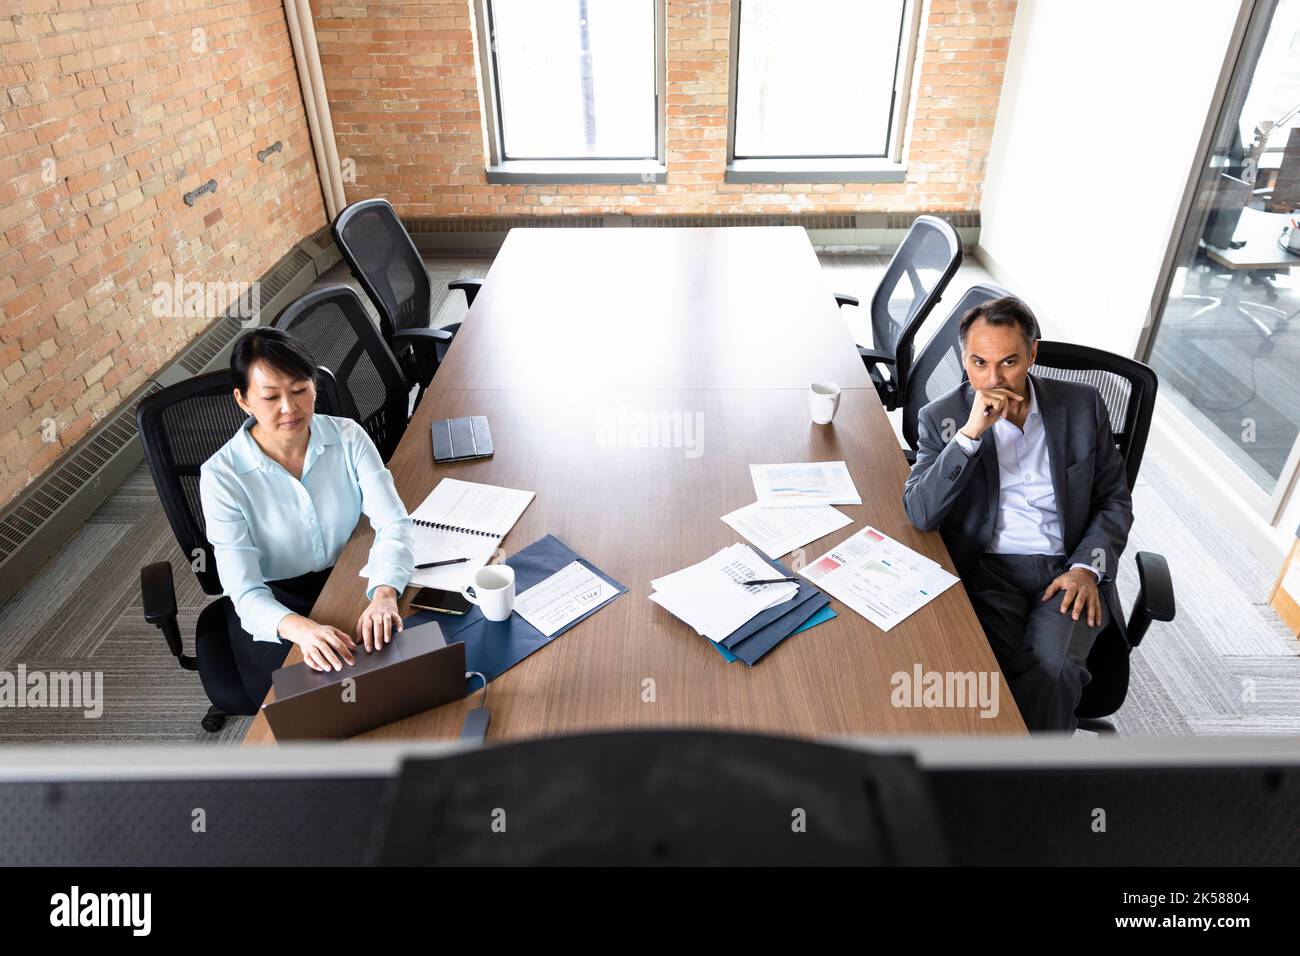 business people looking at screen in conference room meeting Stock Photo